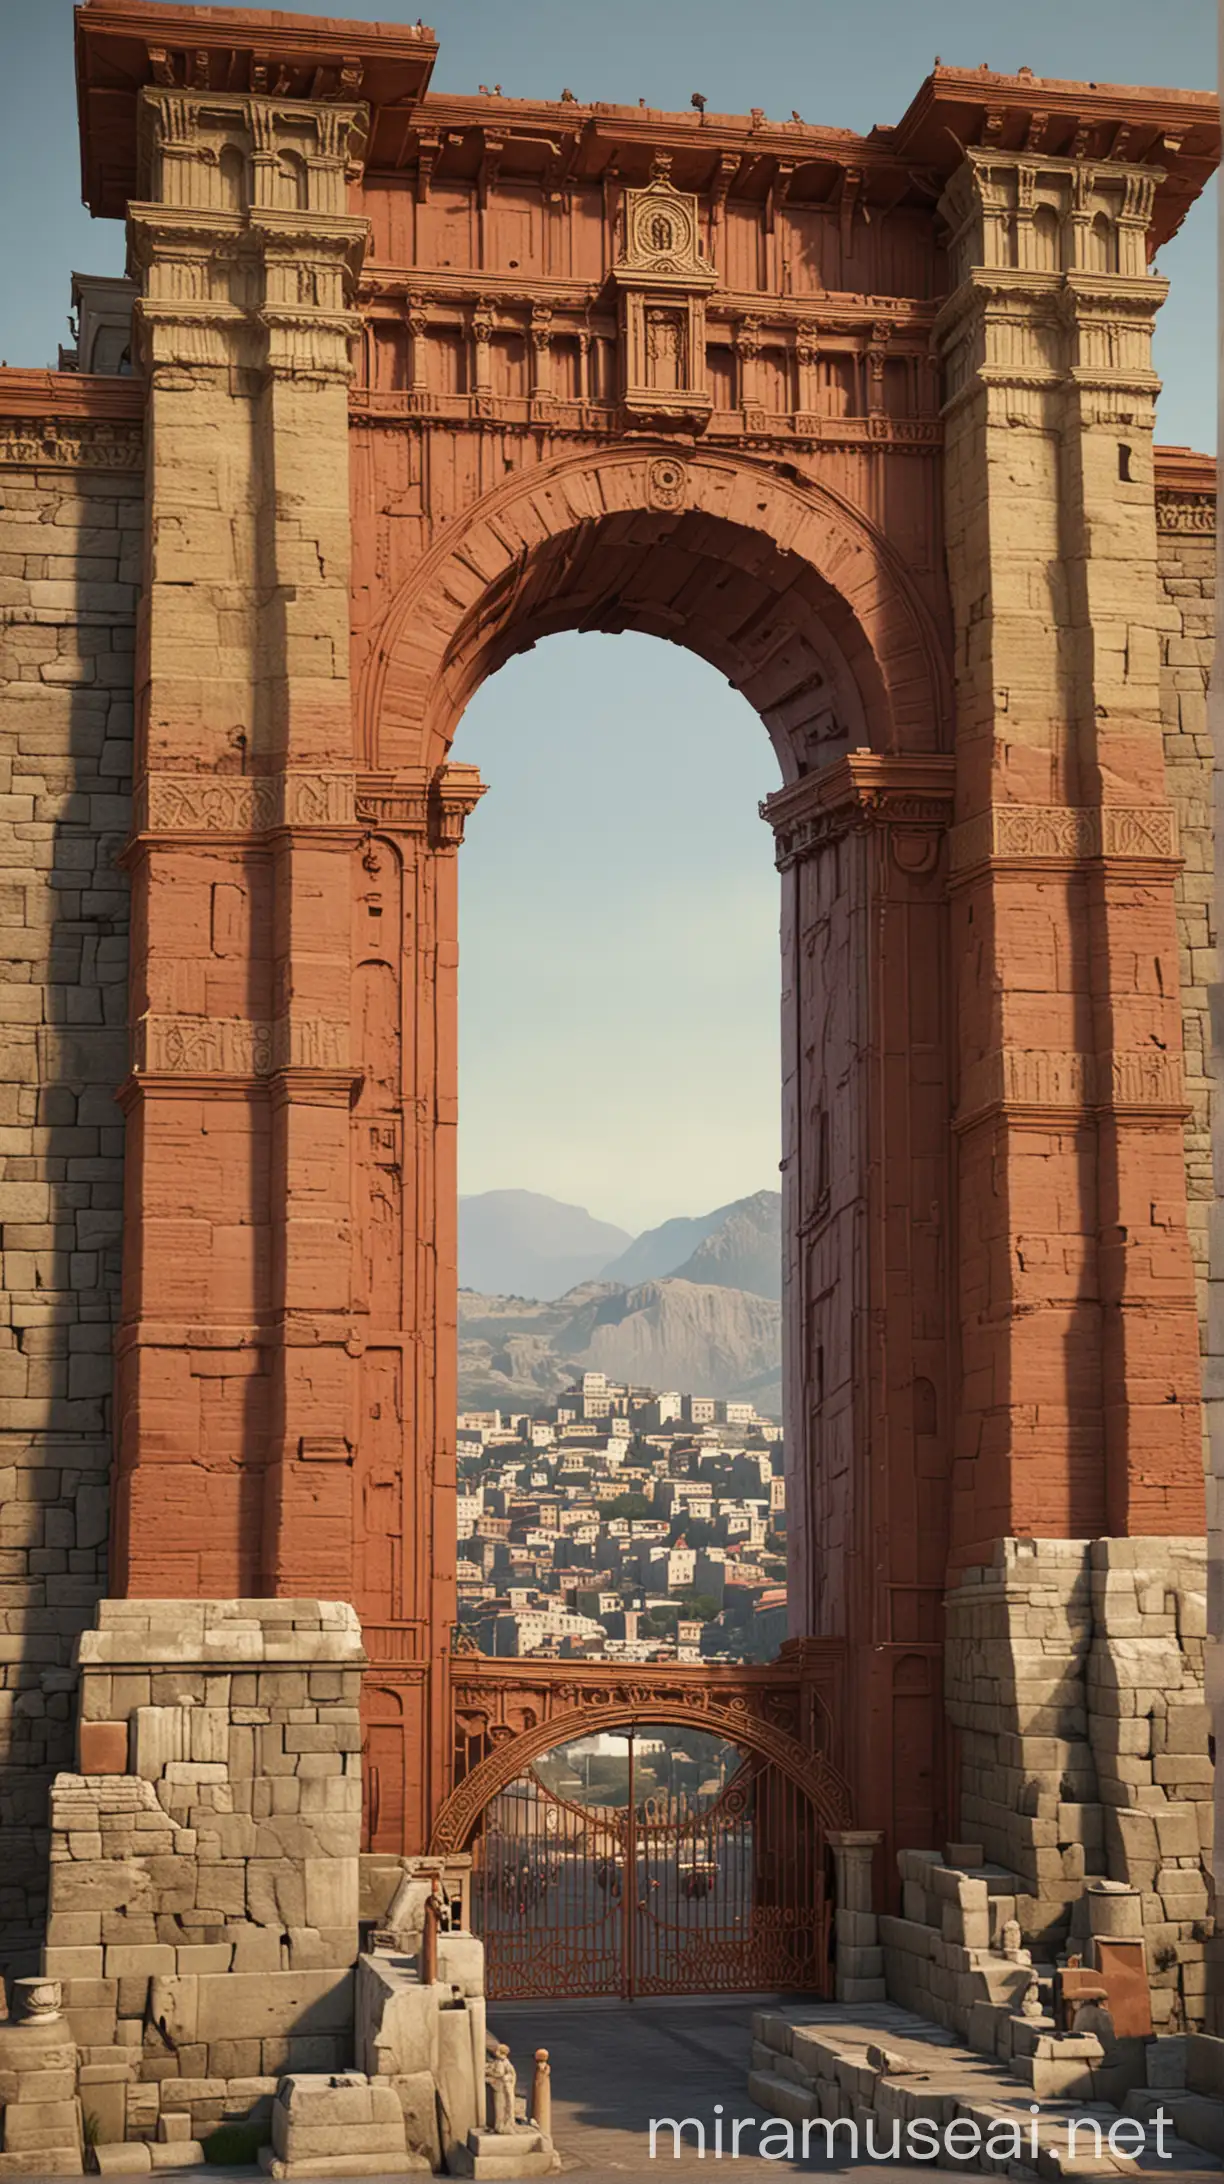 Historical Reconstruction  "Generate an image of the Golden Gate as it might have appeared in the 6th or 7th century during the Byzantine era, with detailed architectural features and people in period-appropriate attire entering the gate."